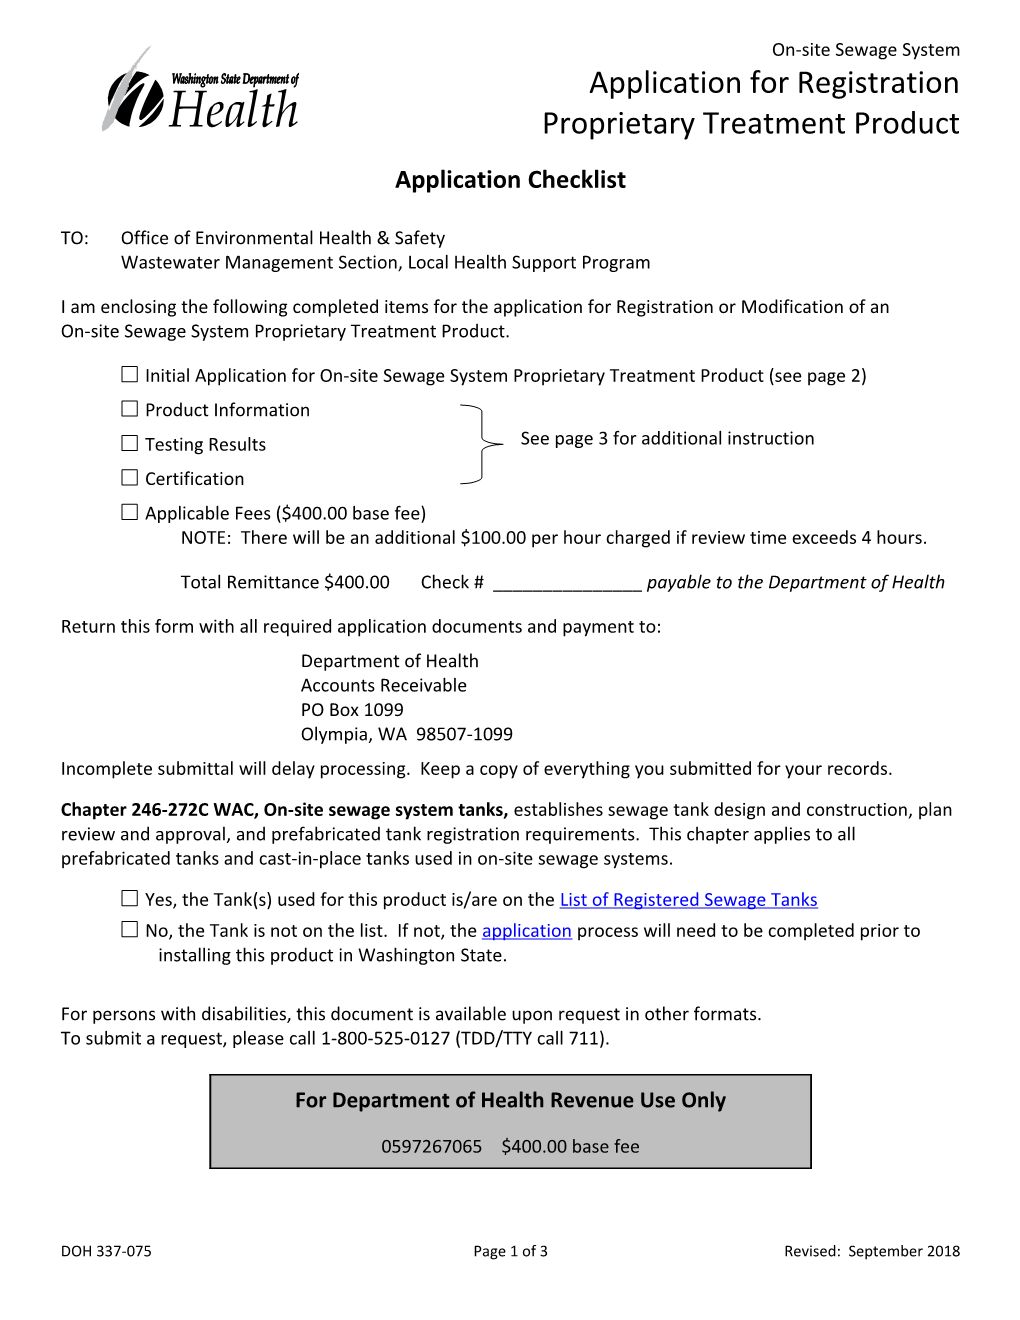 Application for Registration Proprietary Treatment Product